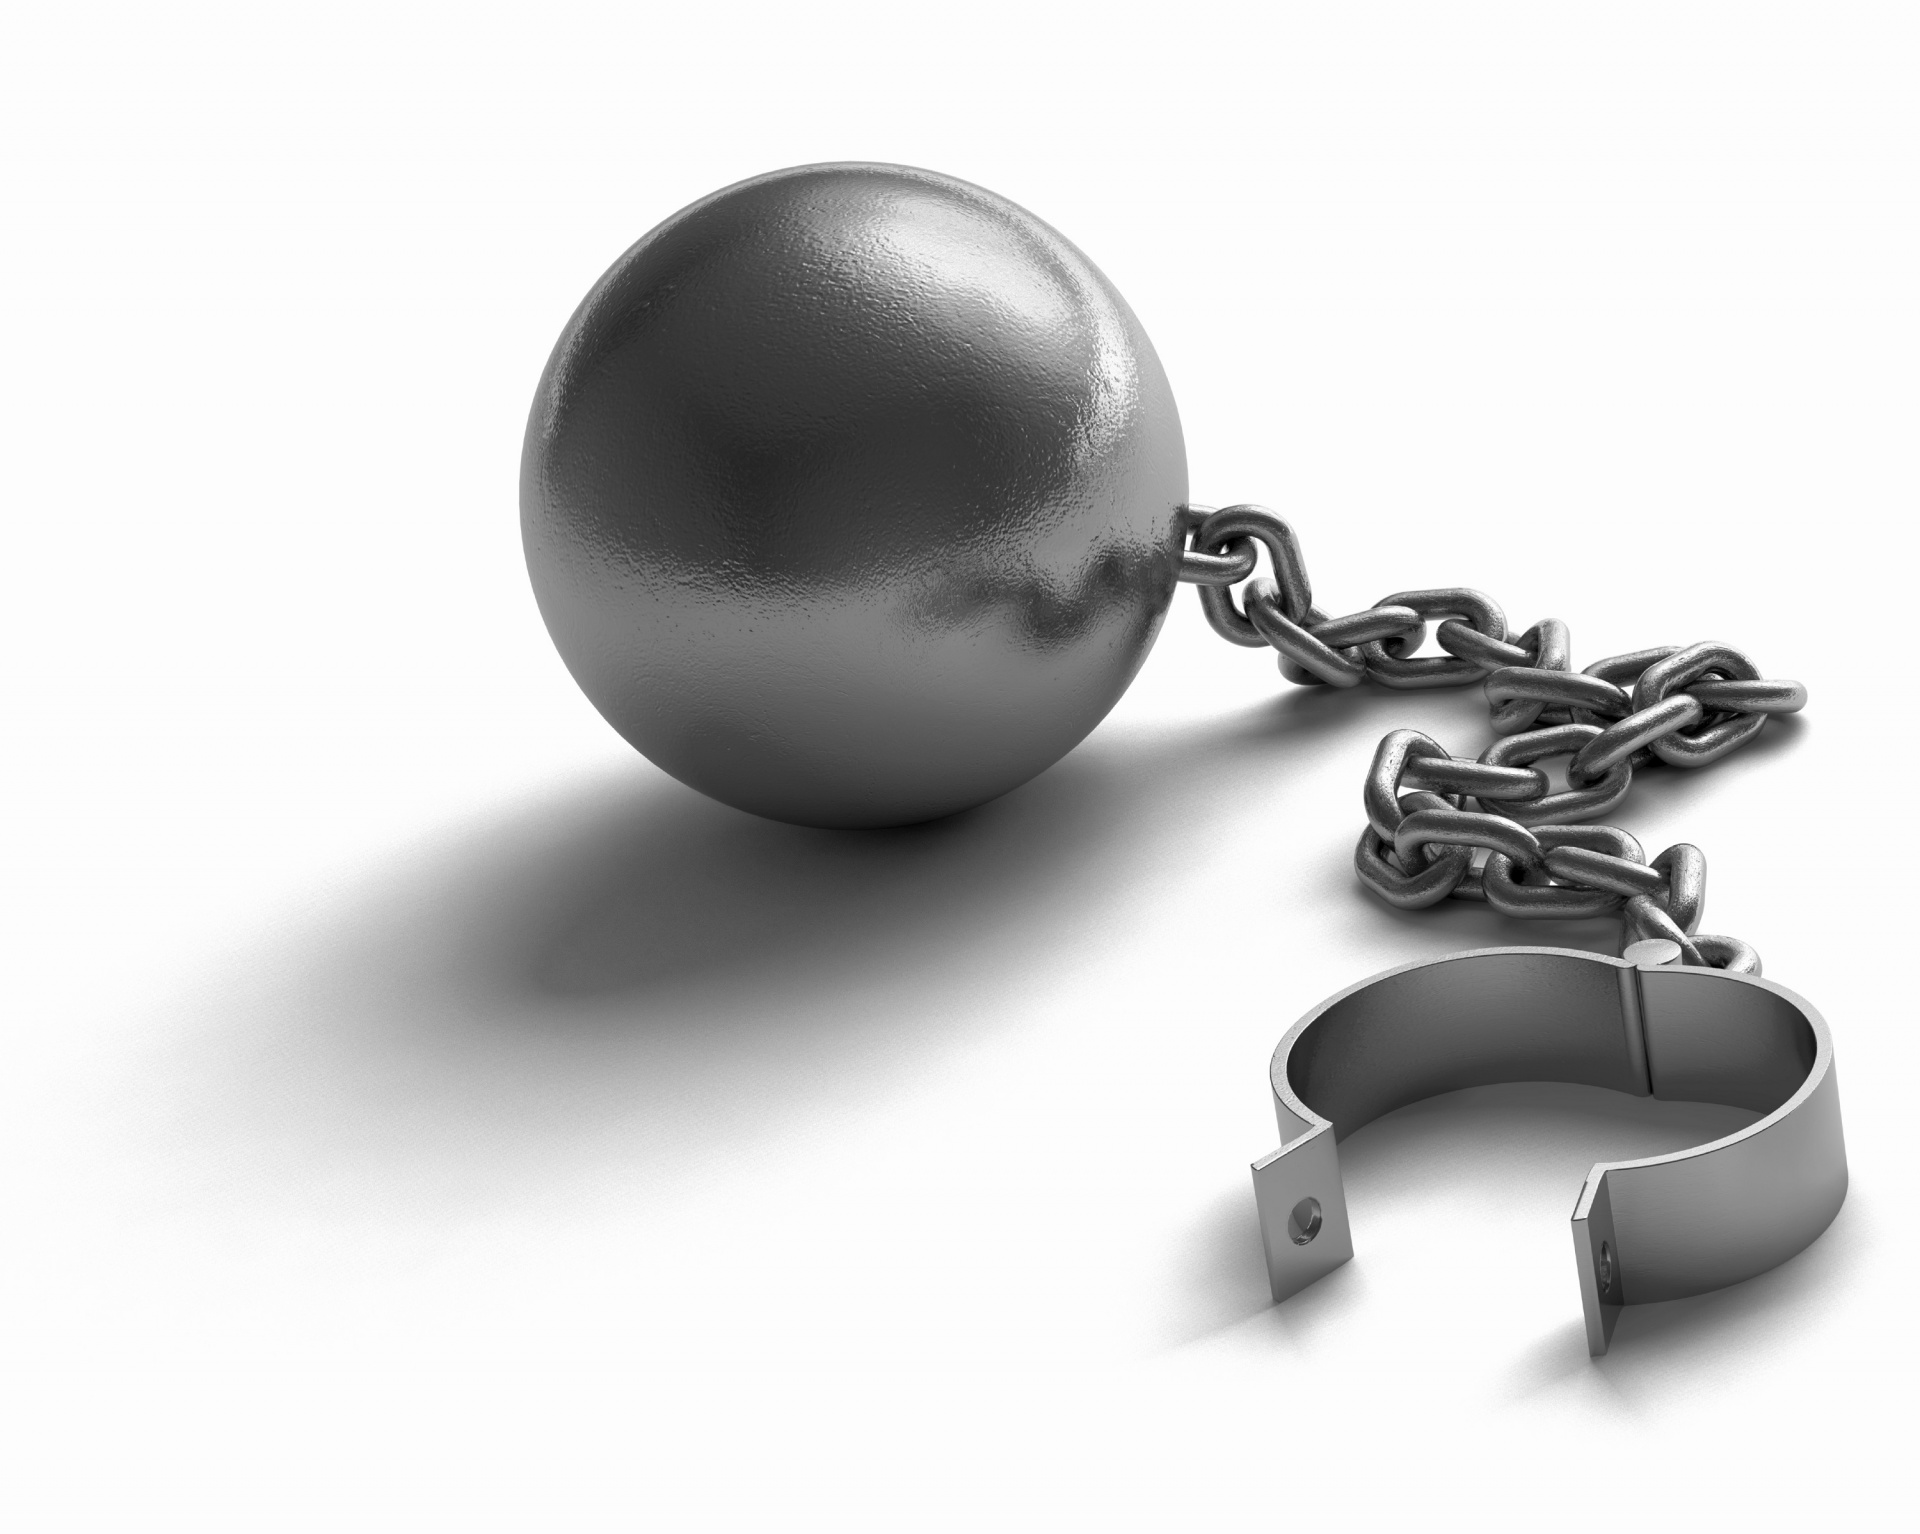 unlocked ball and chain.